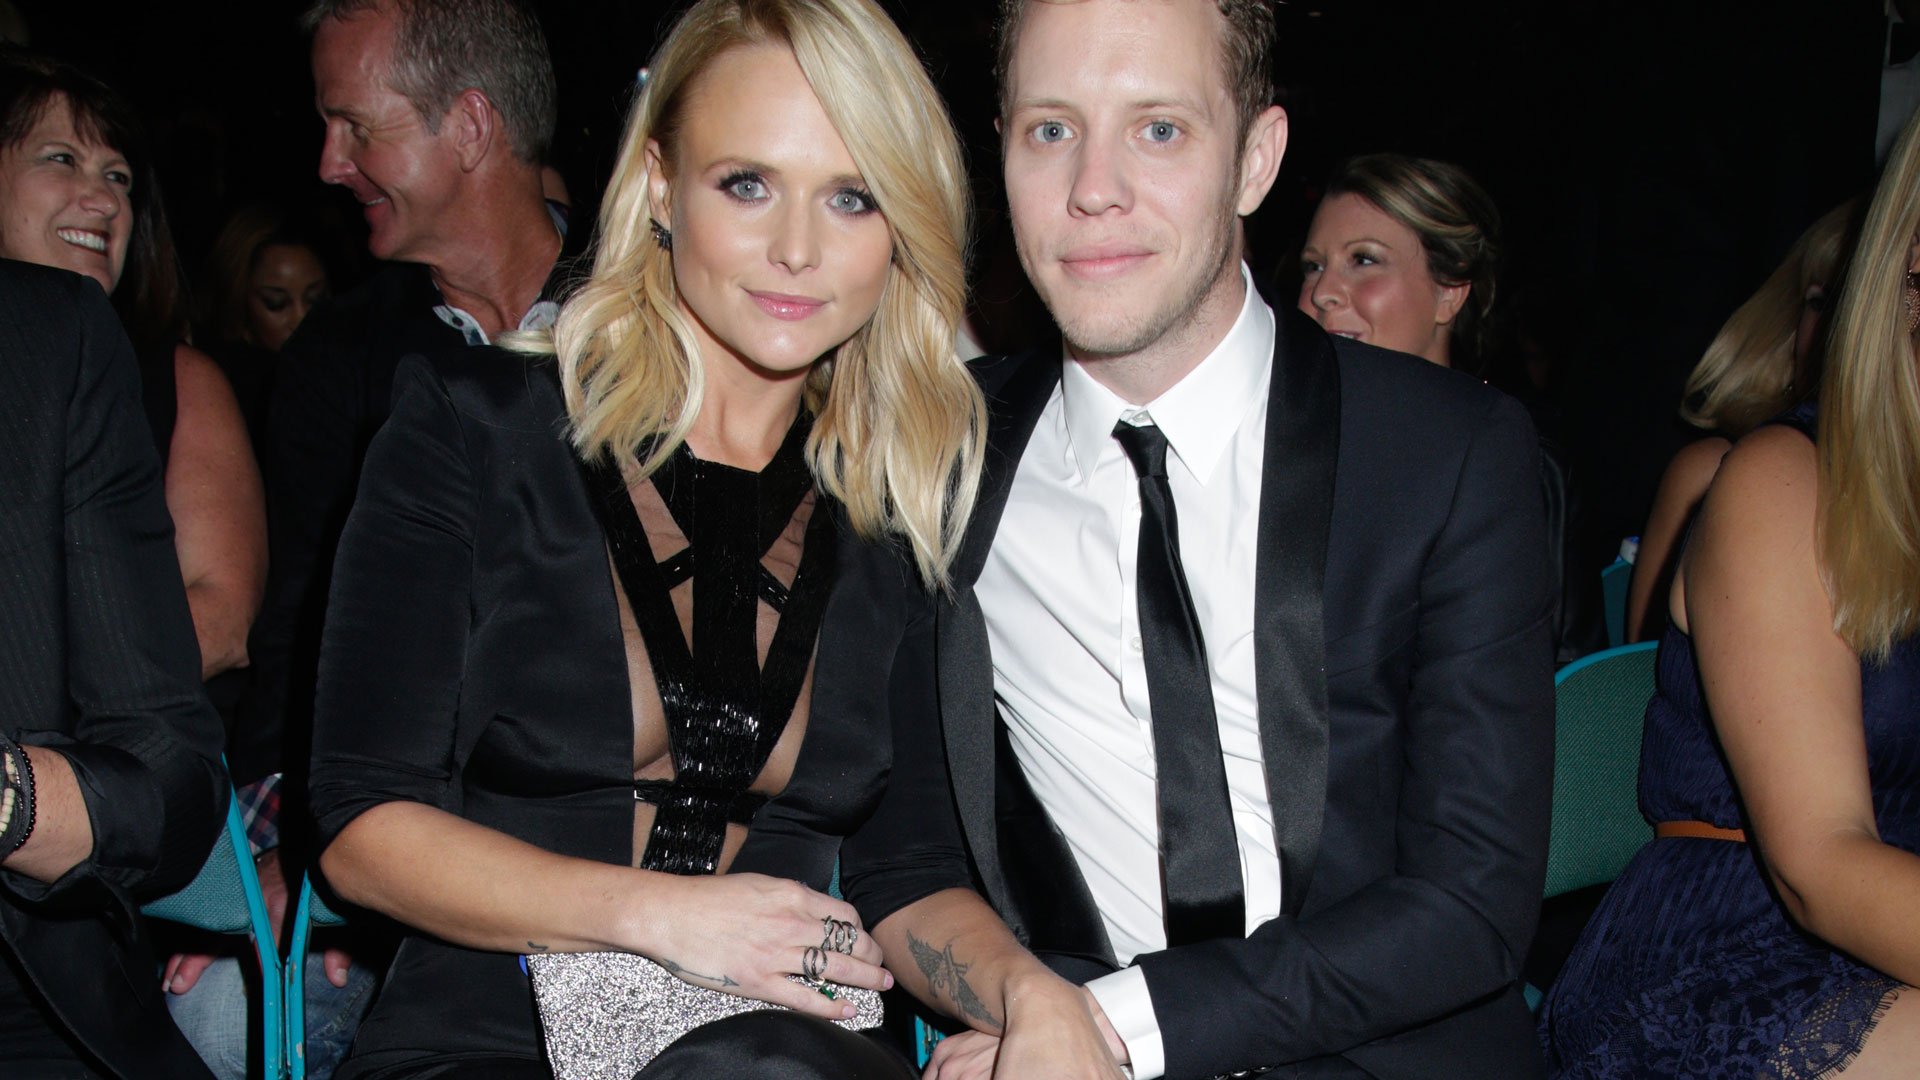 Female Vocalist Of The Year winner, Miranda Lambert, held her new man (and fellow country singer), Anderson East, real close.